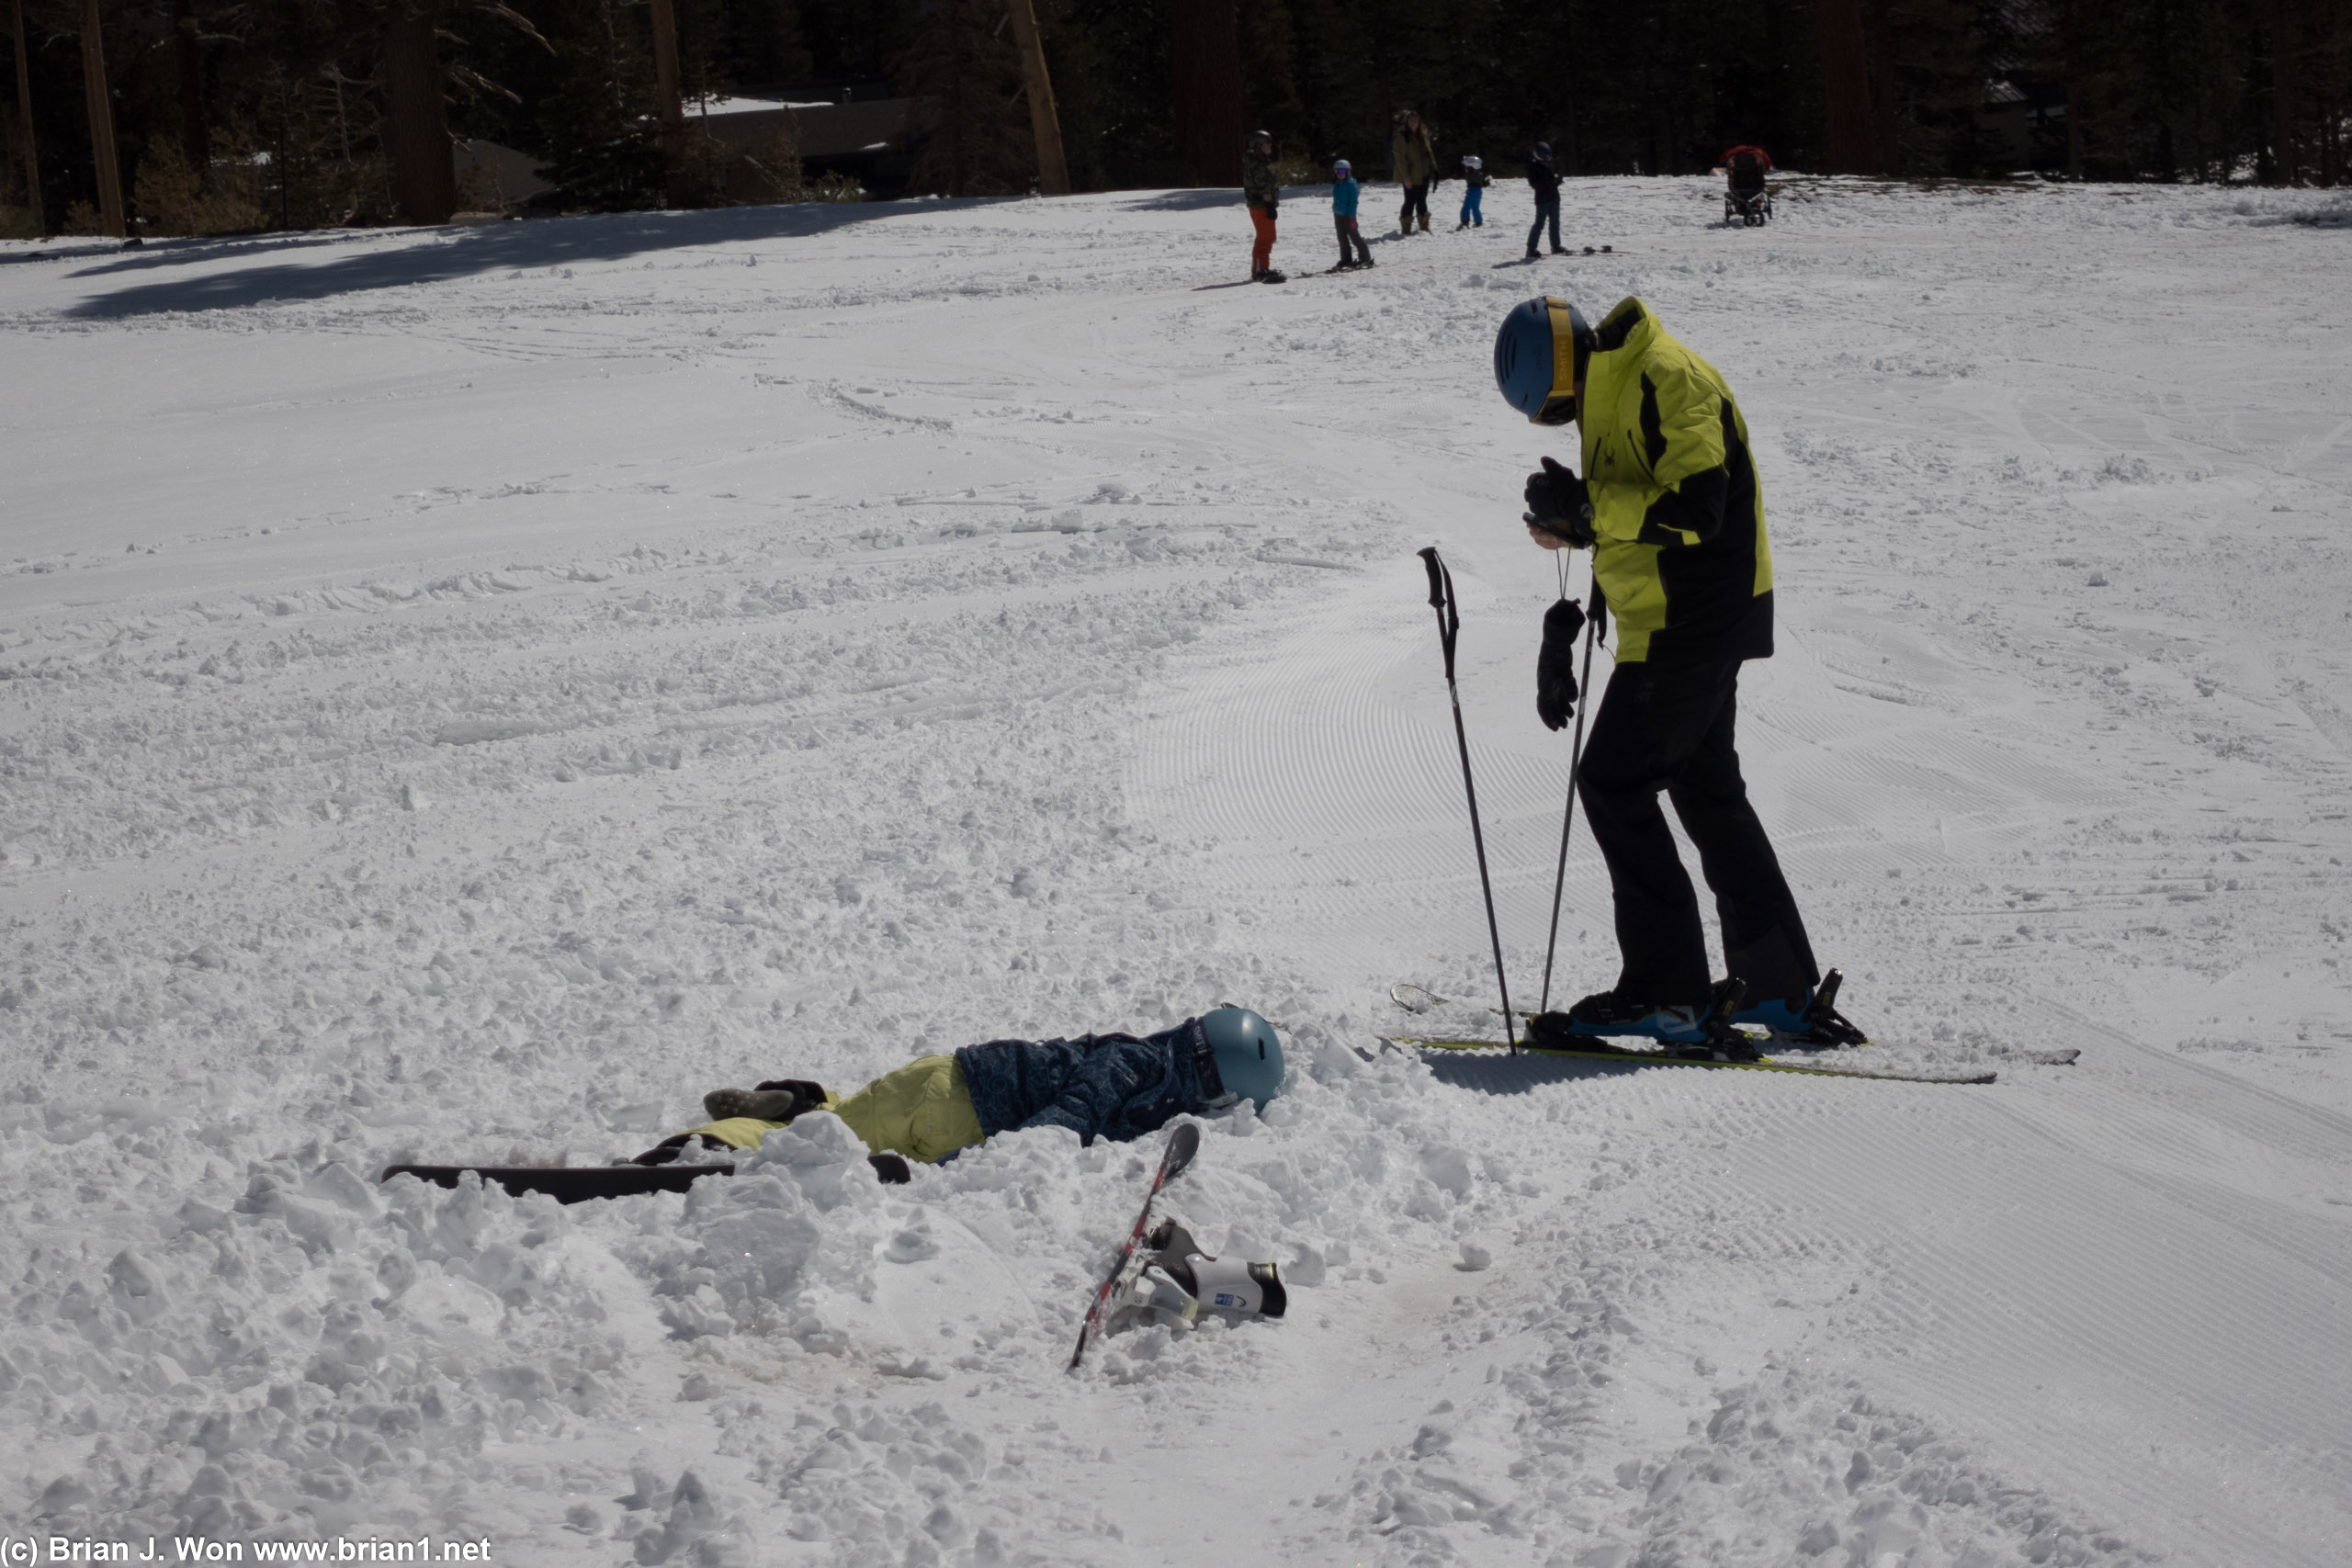 Another new skier managed to crash out of her ski boot.